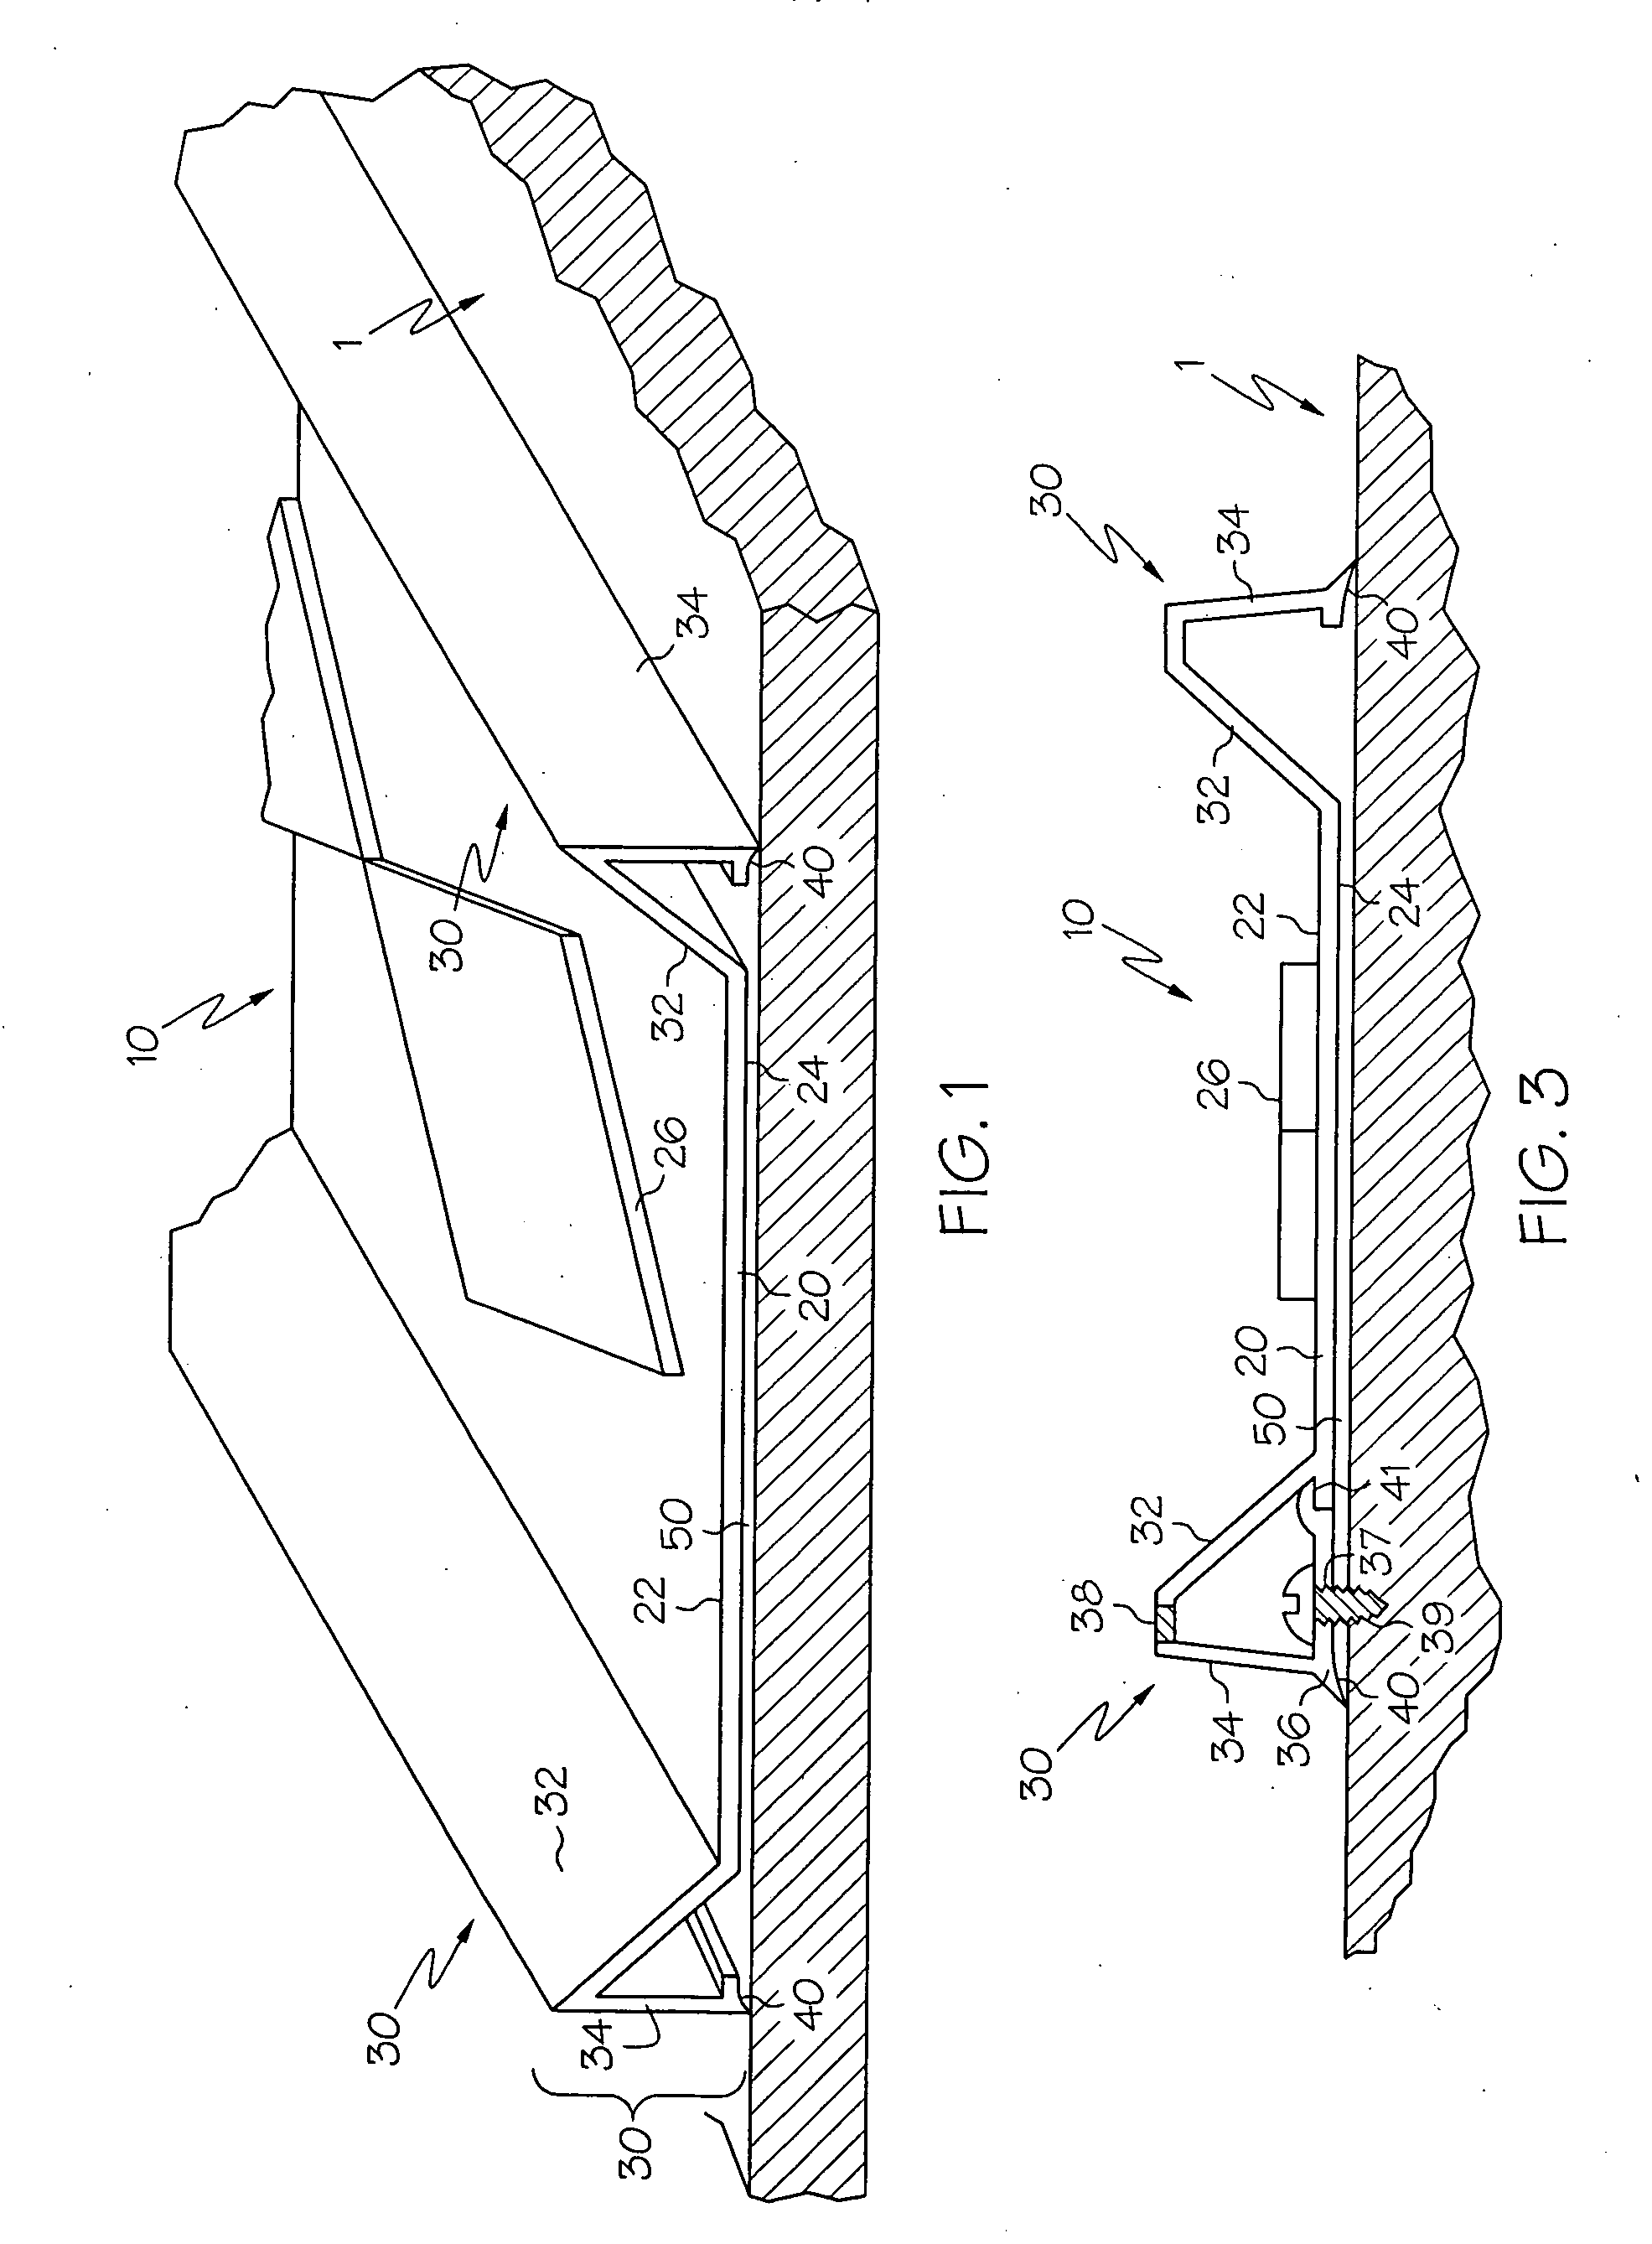 Elongate body for forming profiles in a castable material